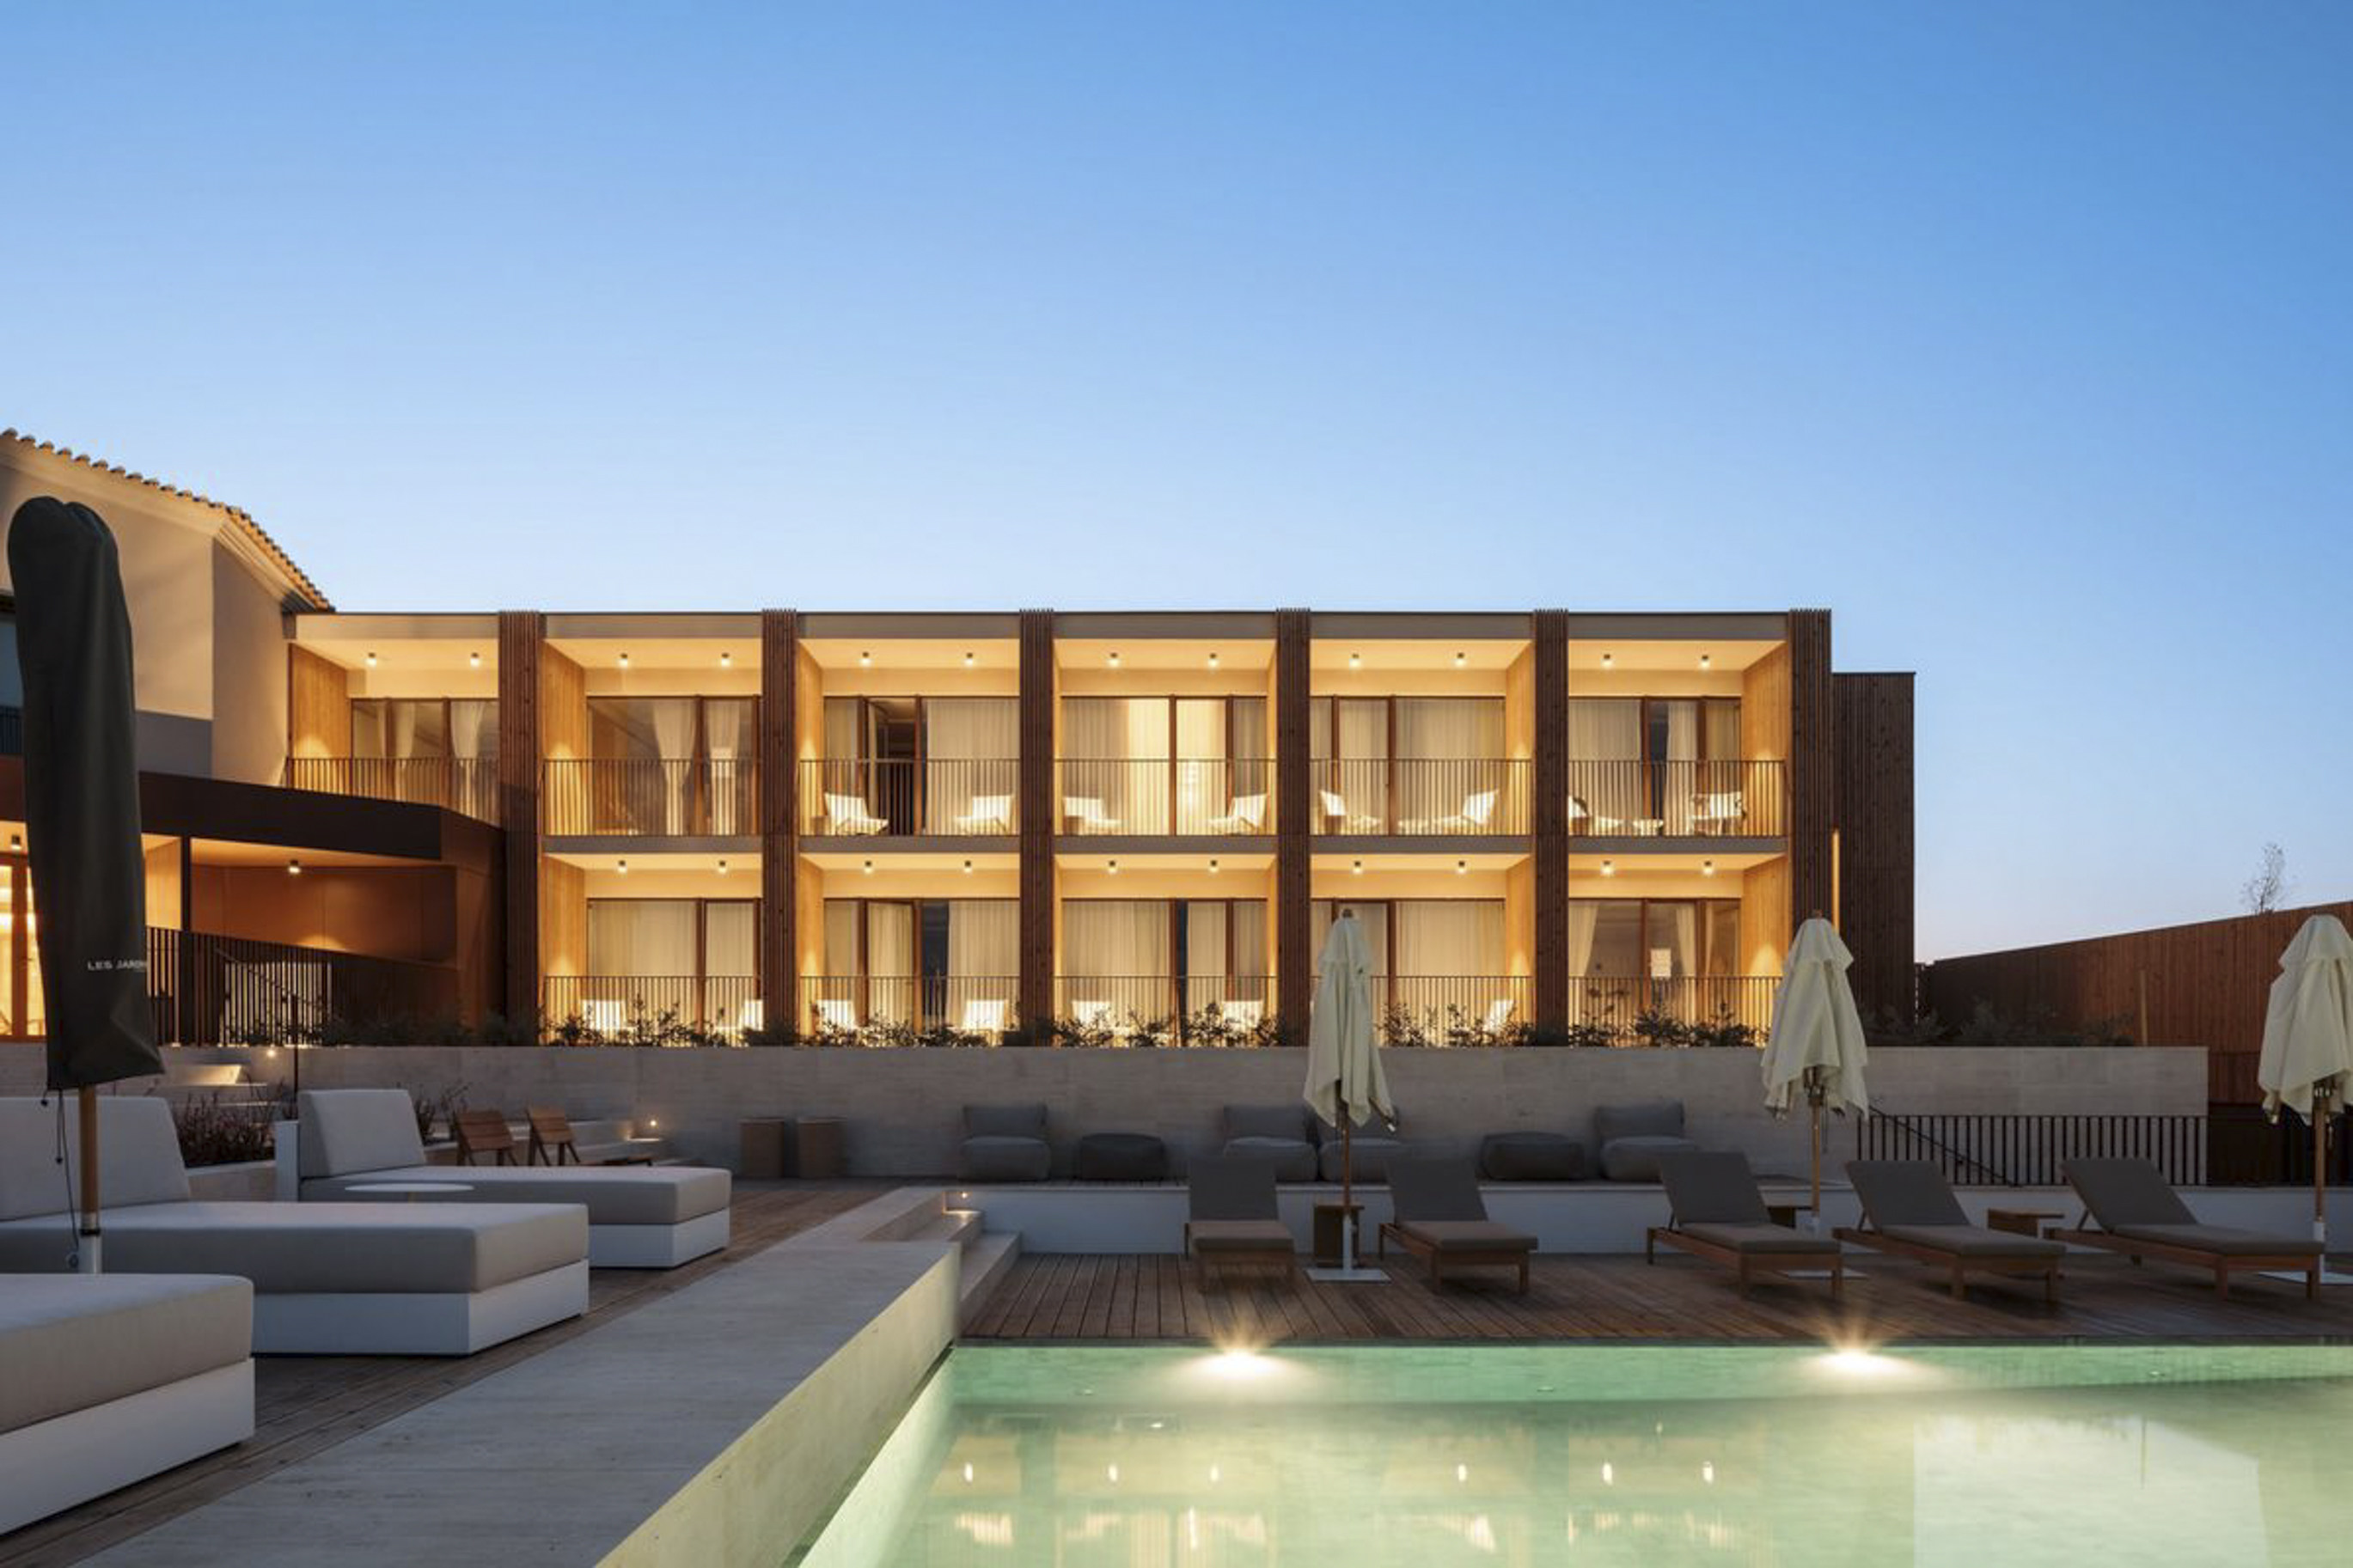 New hotels like Aethos Ericeira are adding an upscale dimension to the surfing mecca of Ericeira. Photo: Aethos Ericeira